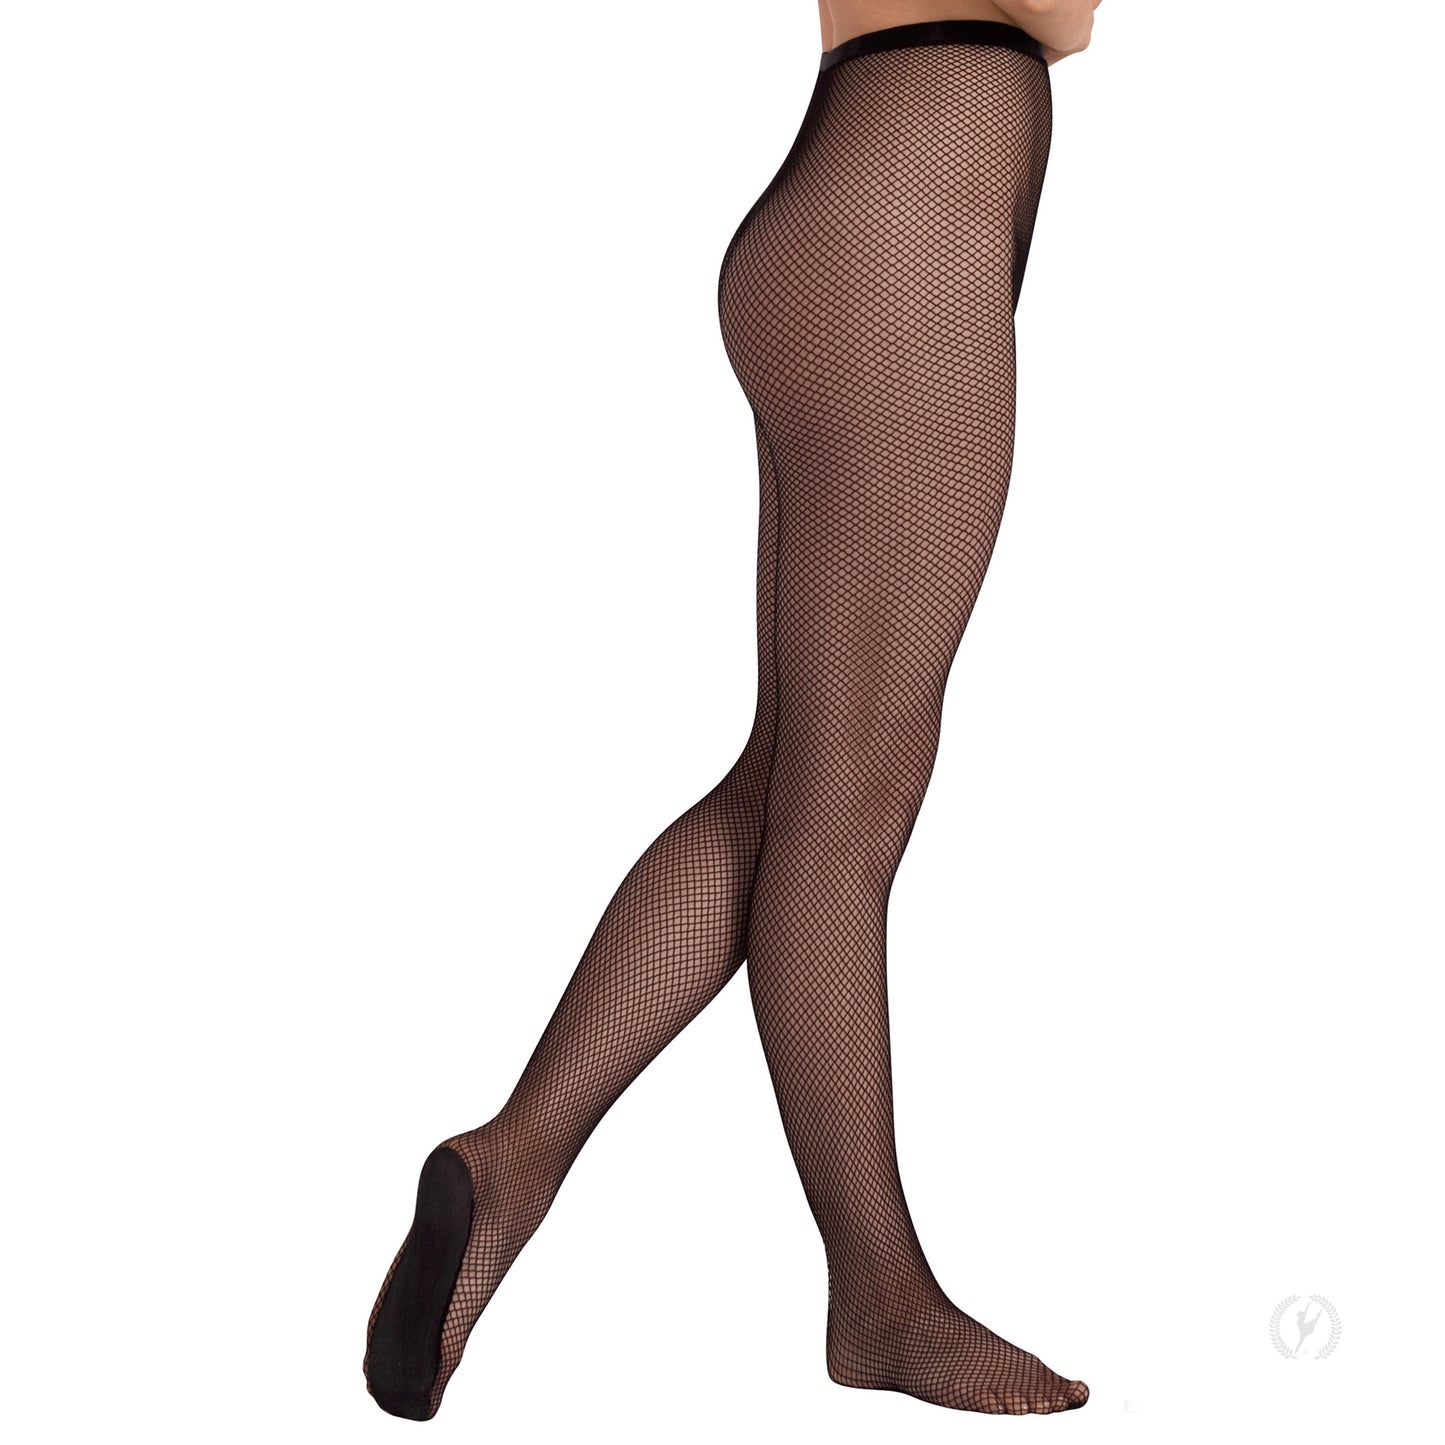 Eurotard 213 Adult Professional Fishnet Tights by EuroSkins